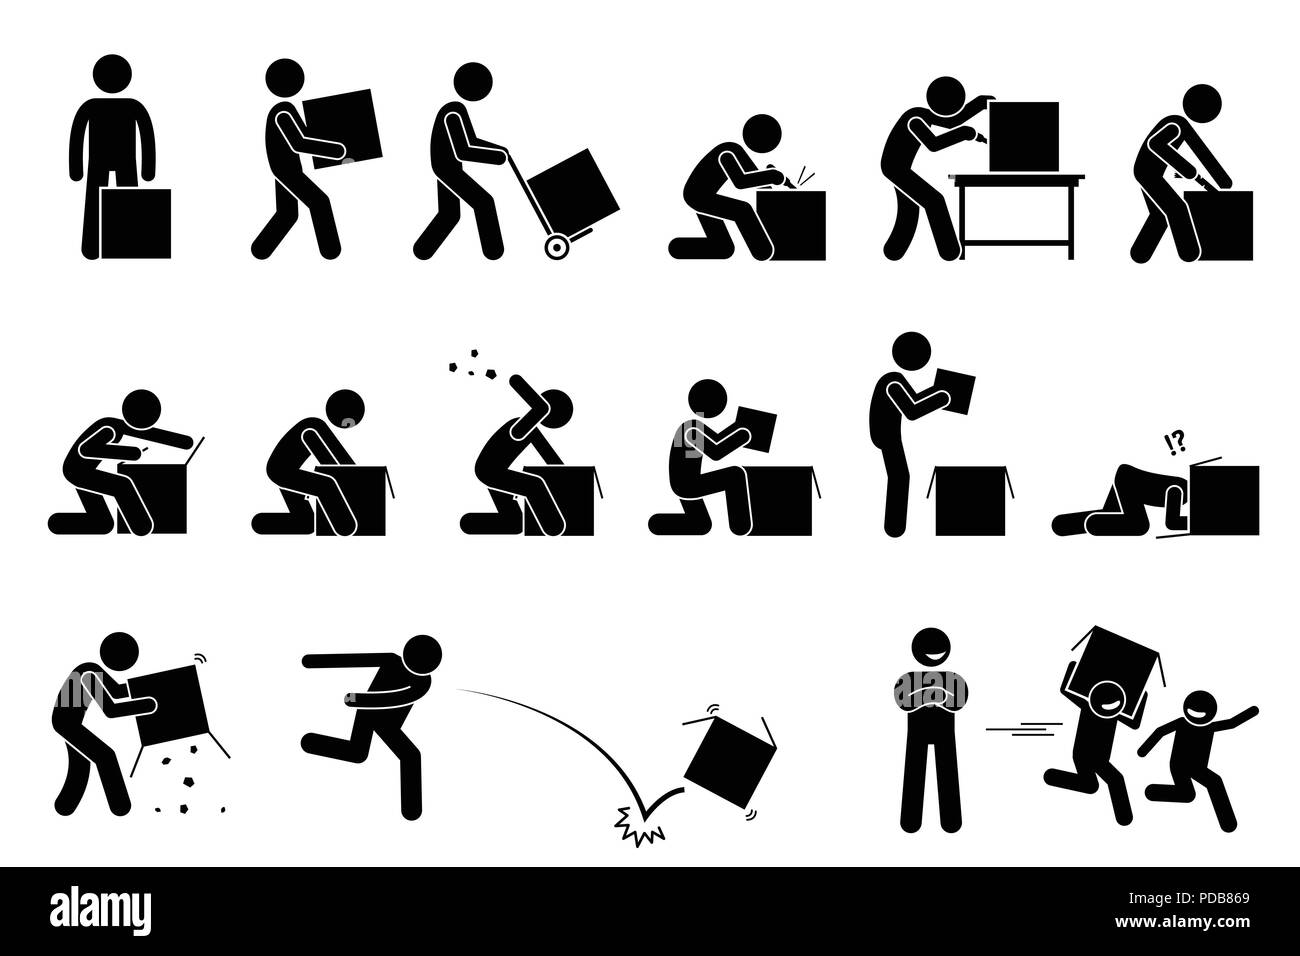 Man opening and unboxing a box. Stick figure pictogram depicts a man carrying, cutting, opening, checking, and throwing away the box. Stock Vector